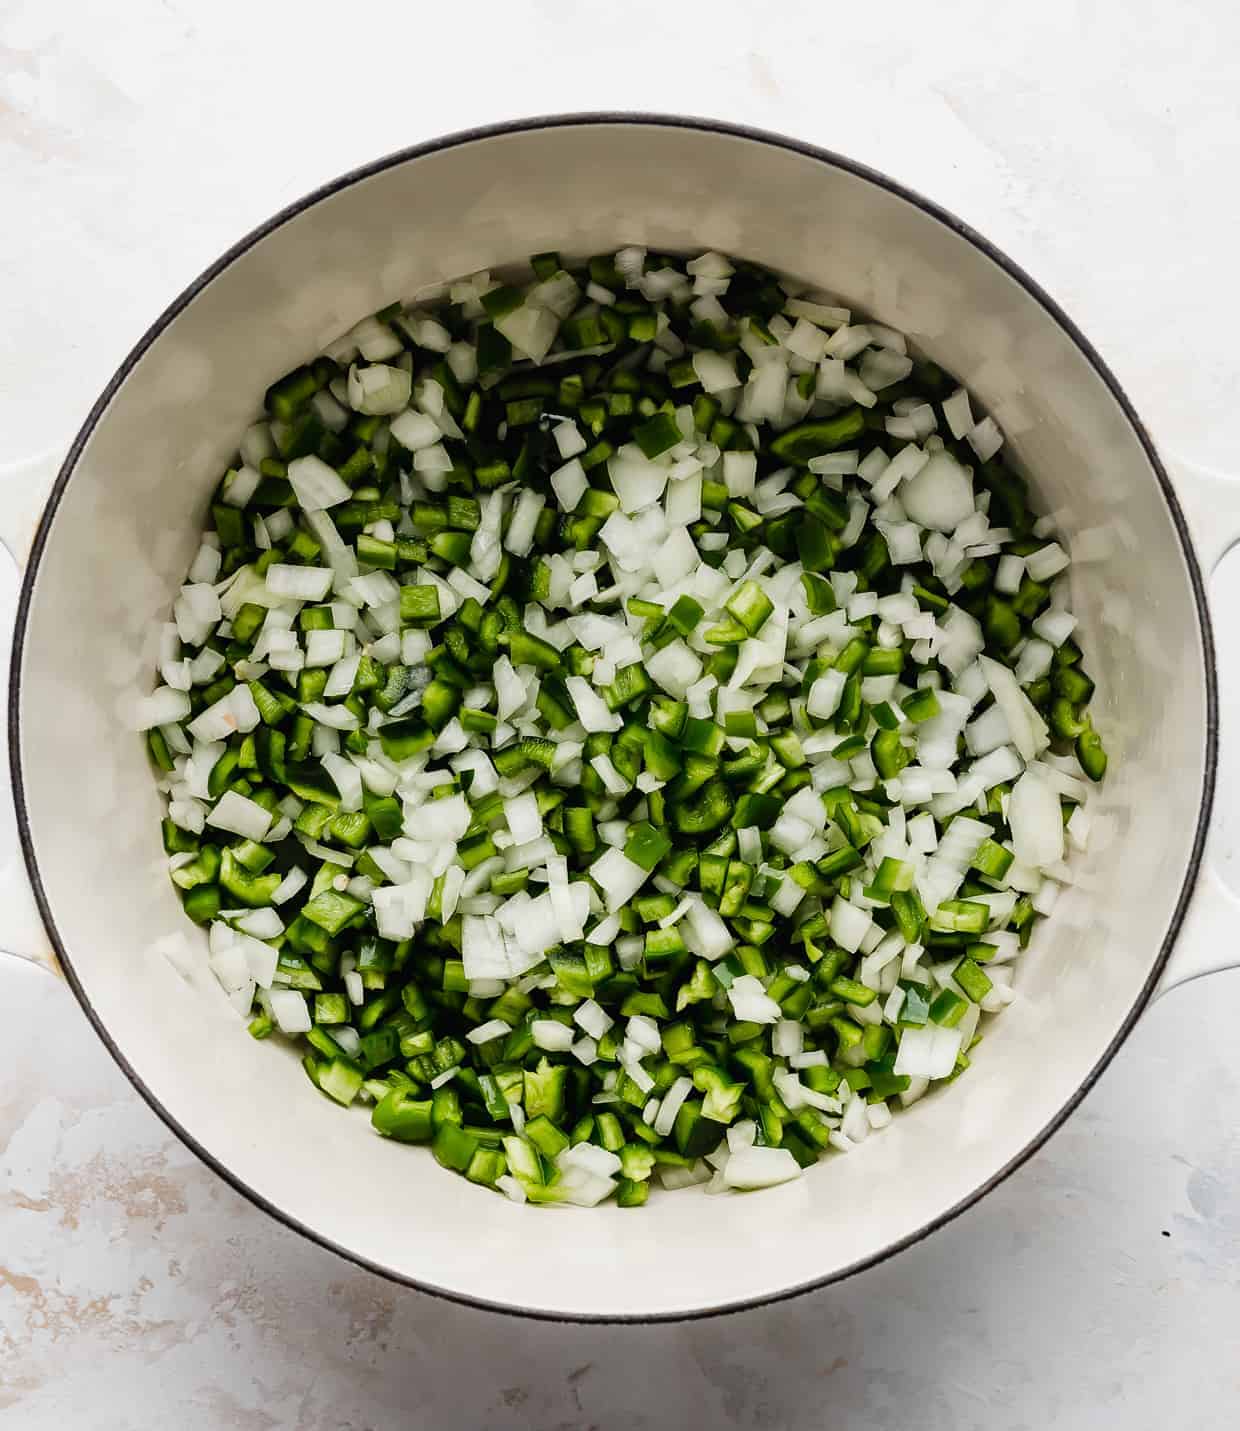 A white pot full of diced onion and diced green peppers.